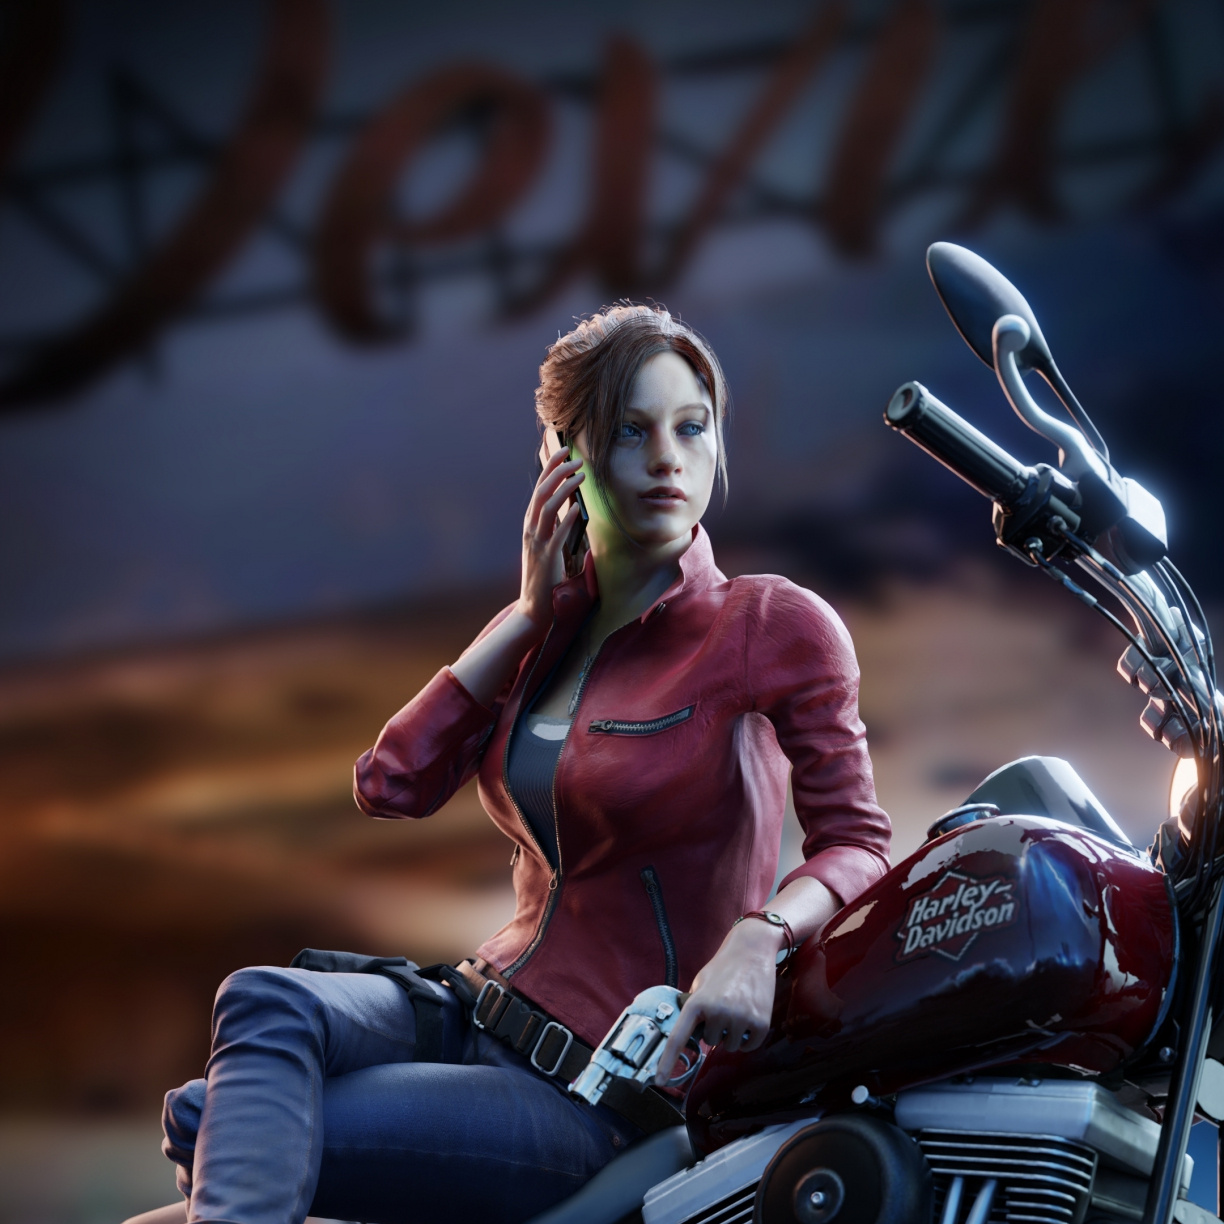 Wallpaper ID 110376  video games Resident Evil Resident Evil 2 Claire  Redfield free download